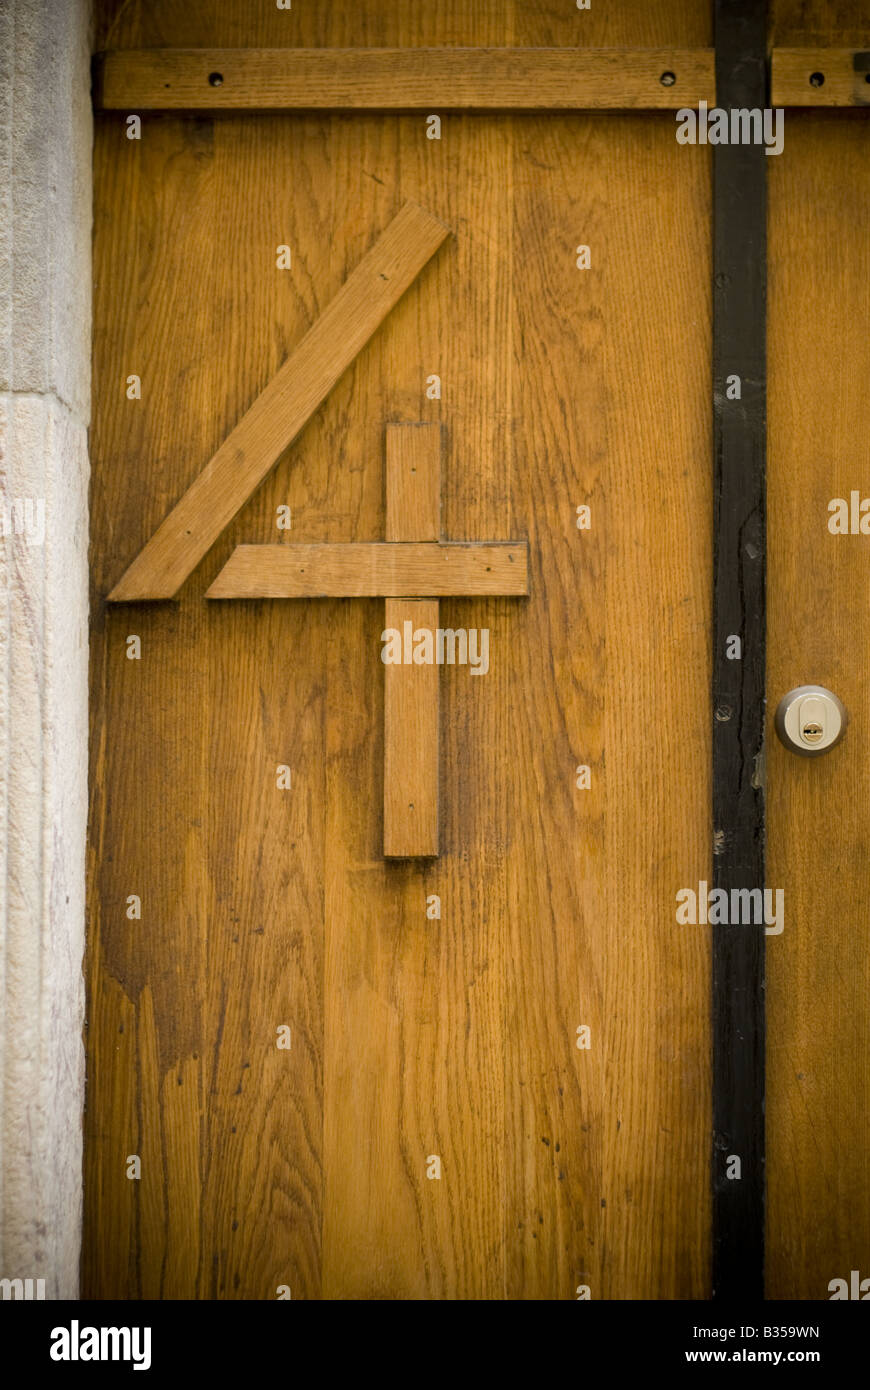 The number 4 (four) on a wooden door in Gamla Stan, Stockholm's historic Old Town, Sweden. Stock Photo